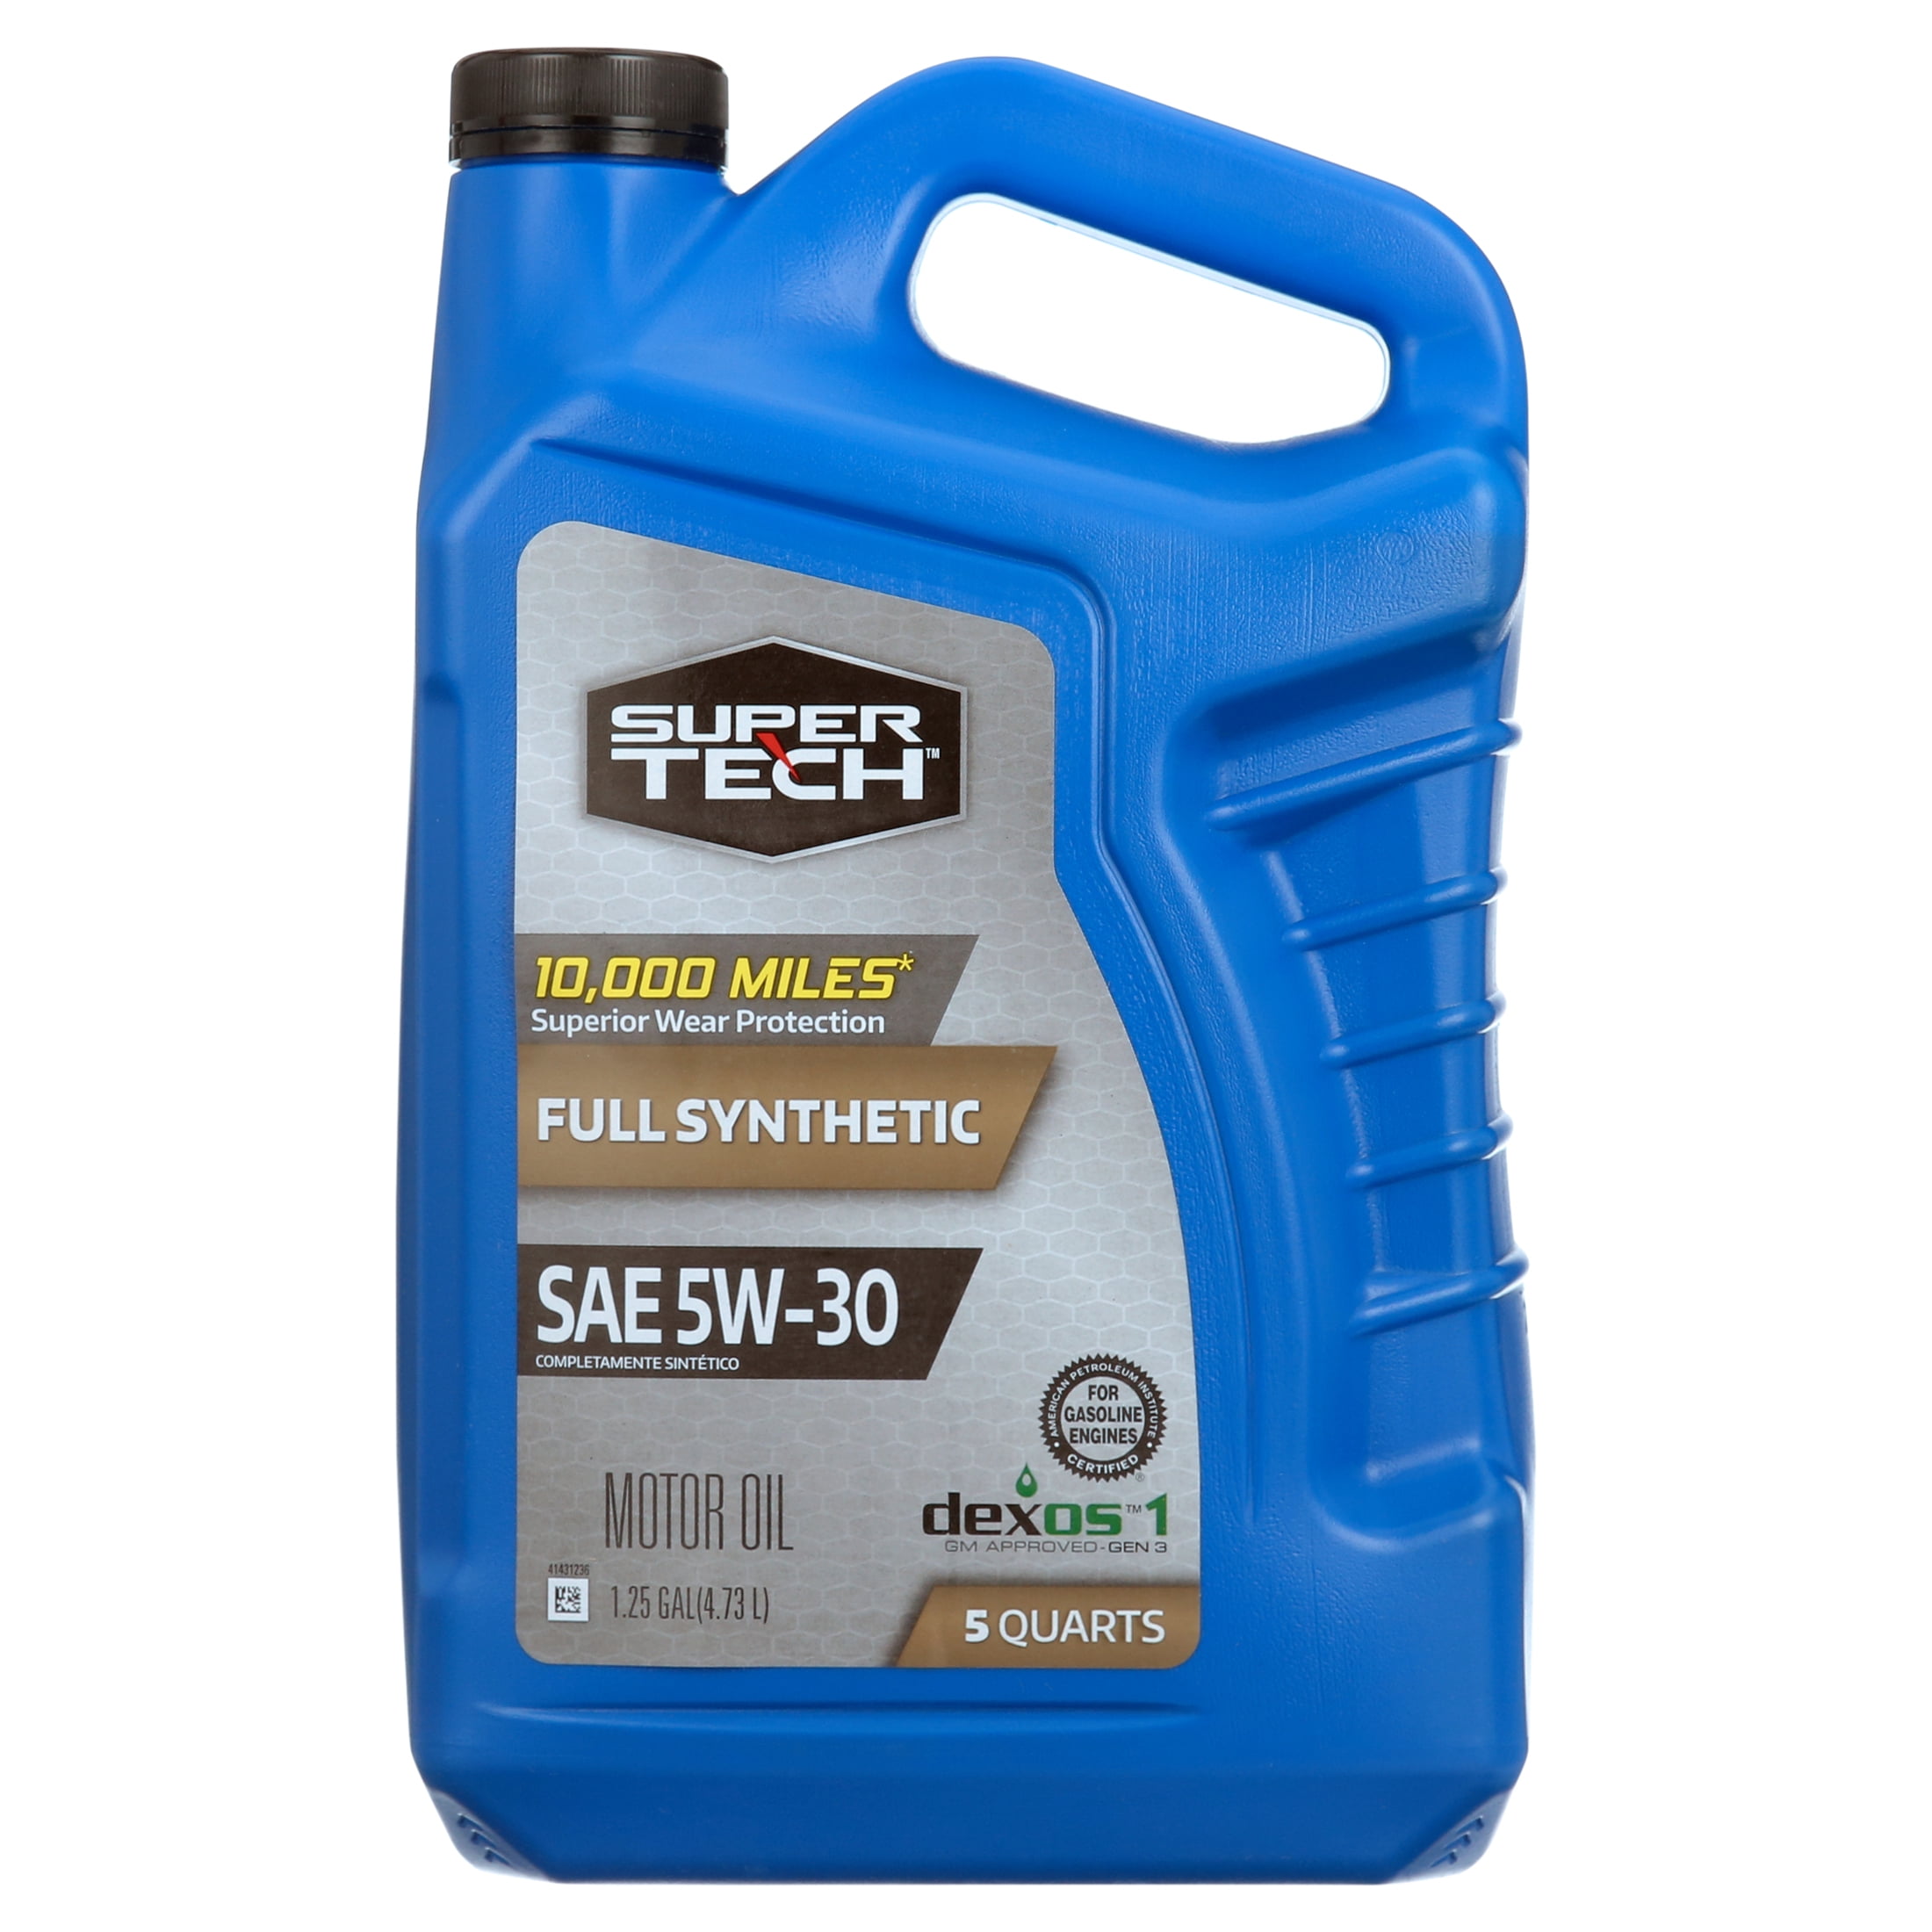 Liqui Moly Fully Synthetic Longtime High Tech 5W-30 Motor Oil - Case of 6,  1 Liter